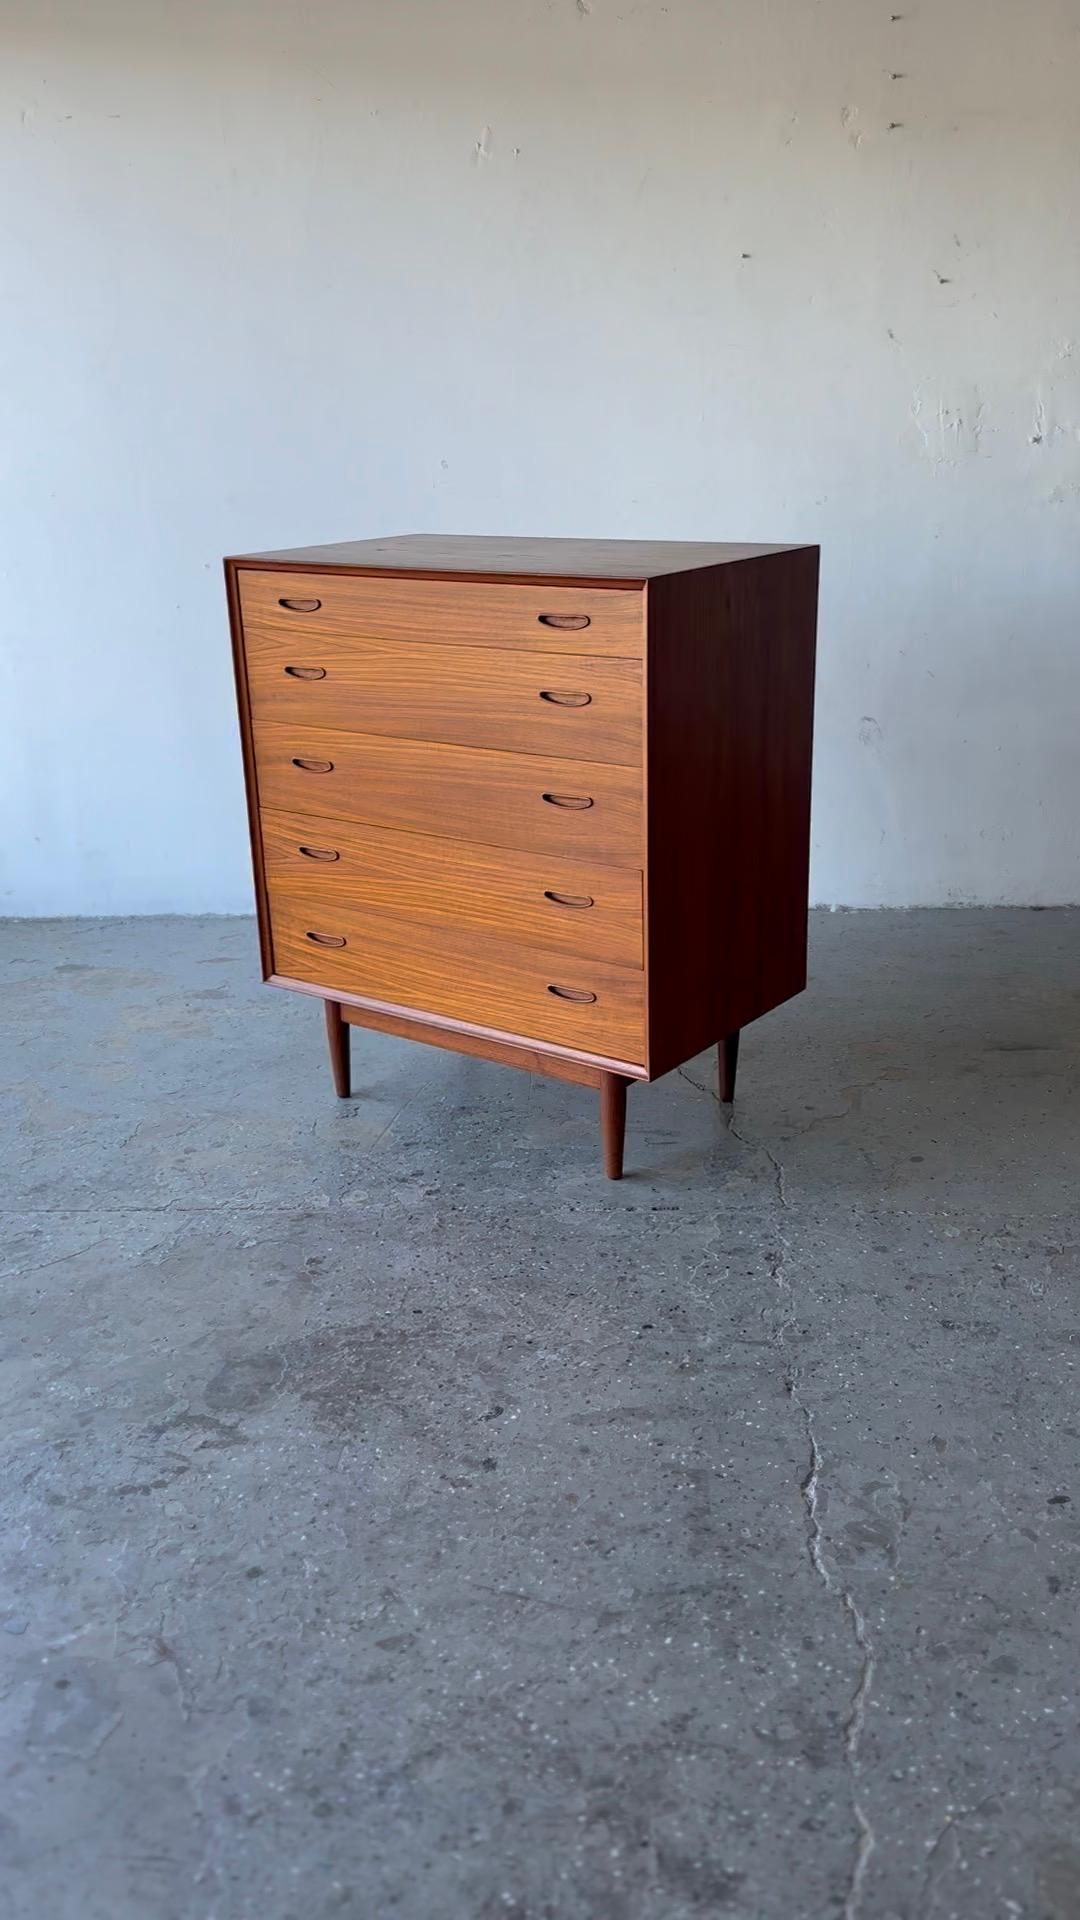 Erik Buch Teak Danish Modern Gentlemen's Chest
Elevate your mid century  bedroom  with this exquisite Danish Modern chest of drawers,  This elegant piece is a testament to high-quality craftsmanship and timeless design of the Danes, making it a